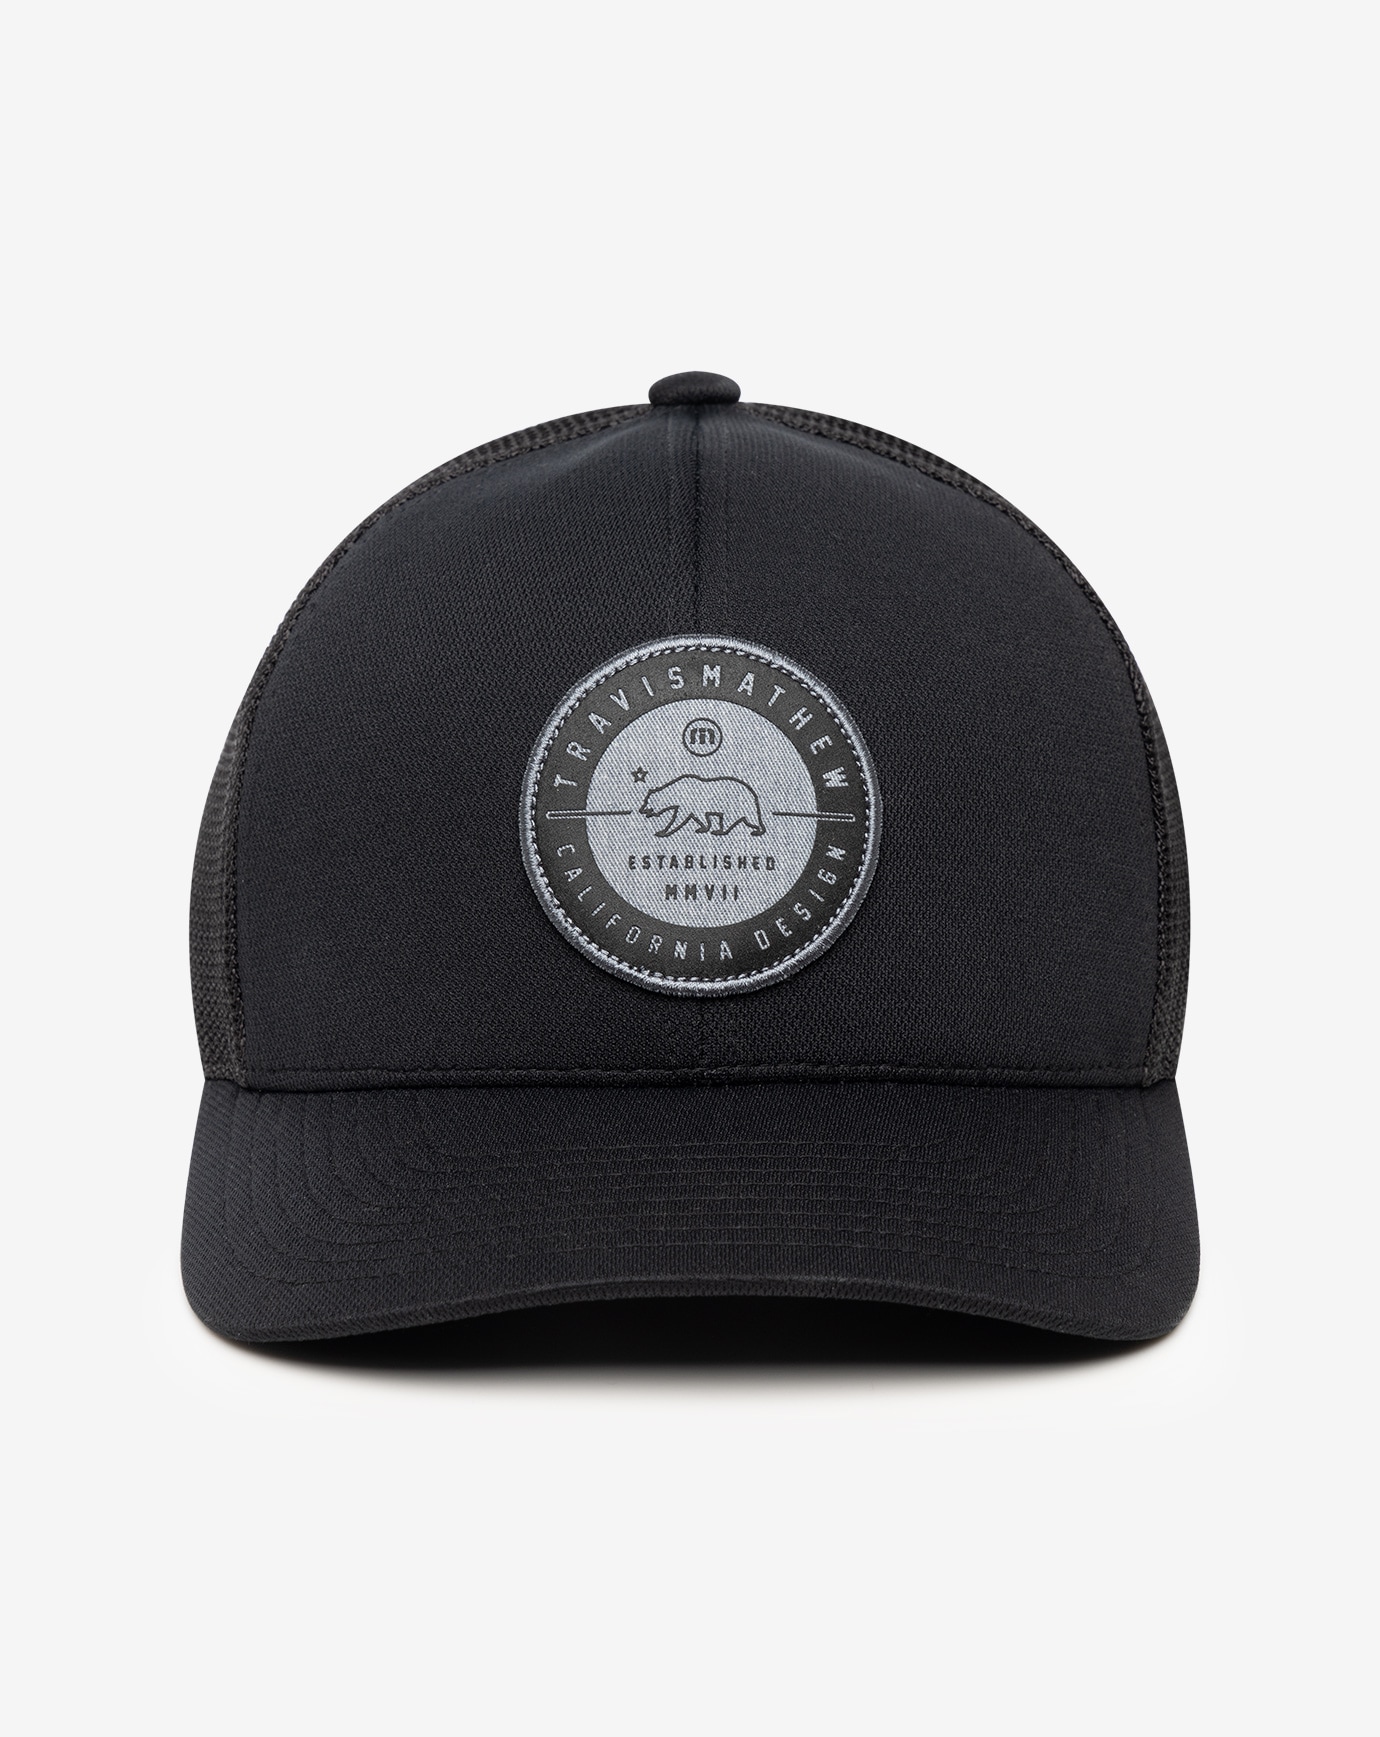 Related Product - BLACK BEAR 2.0 FITTED HAT